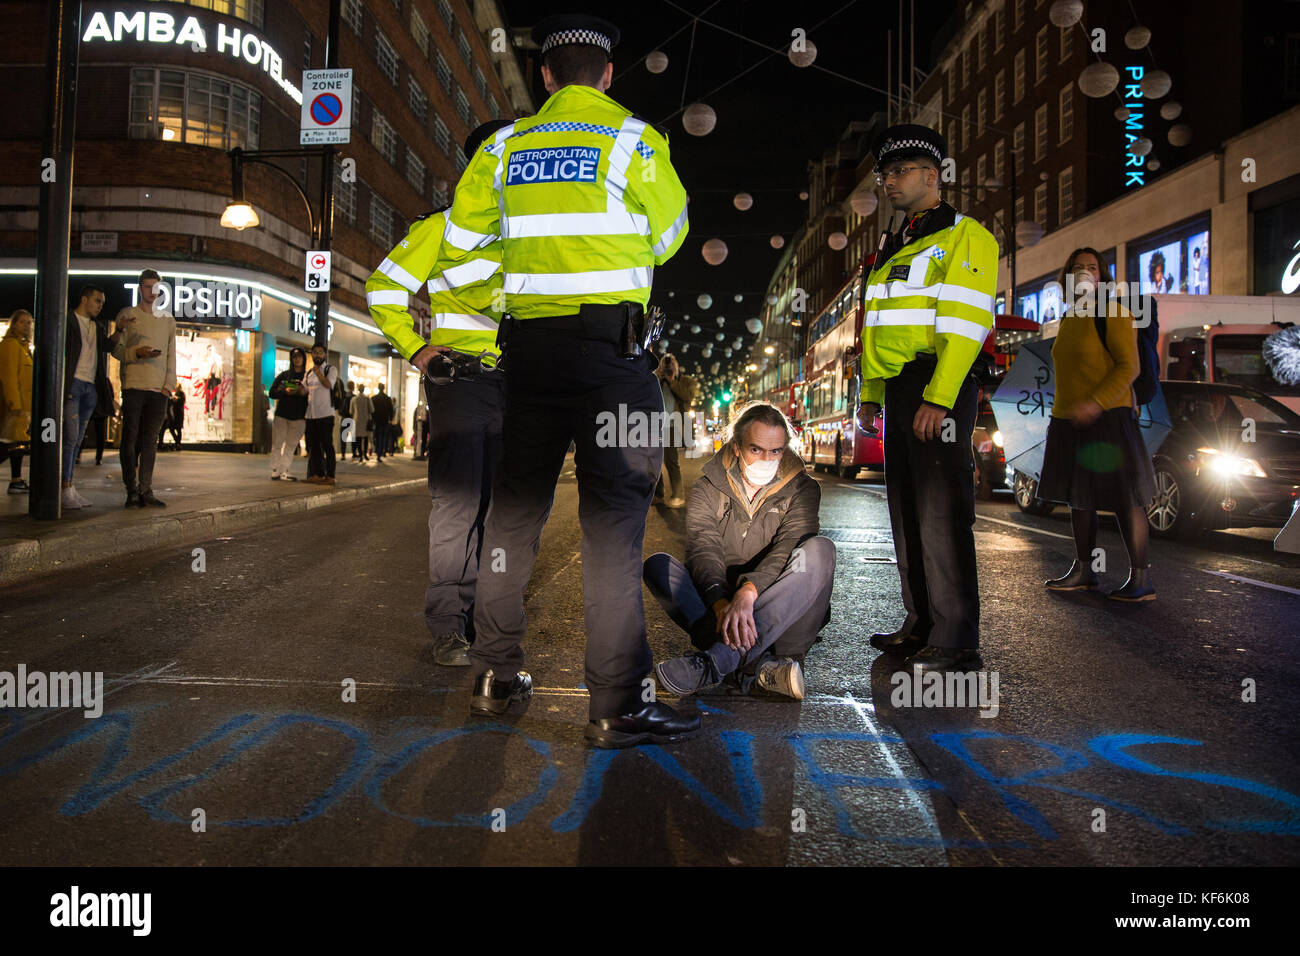 London, UK. 25th Oct, 2017. Roger Hallam, PhD student and environmental campaigner, stages a sit-down protest to block Oxford Street at Marble Arch during a protest by environmental activists from the Stop Killing Londoners campaign to demand urgent attention to prevent premature deaths from air pollution. Credit: Mark Kerrison/Alamy Live News Stock Photo